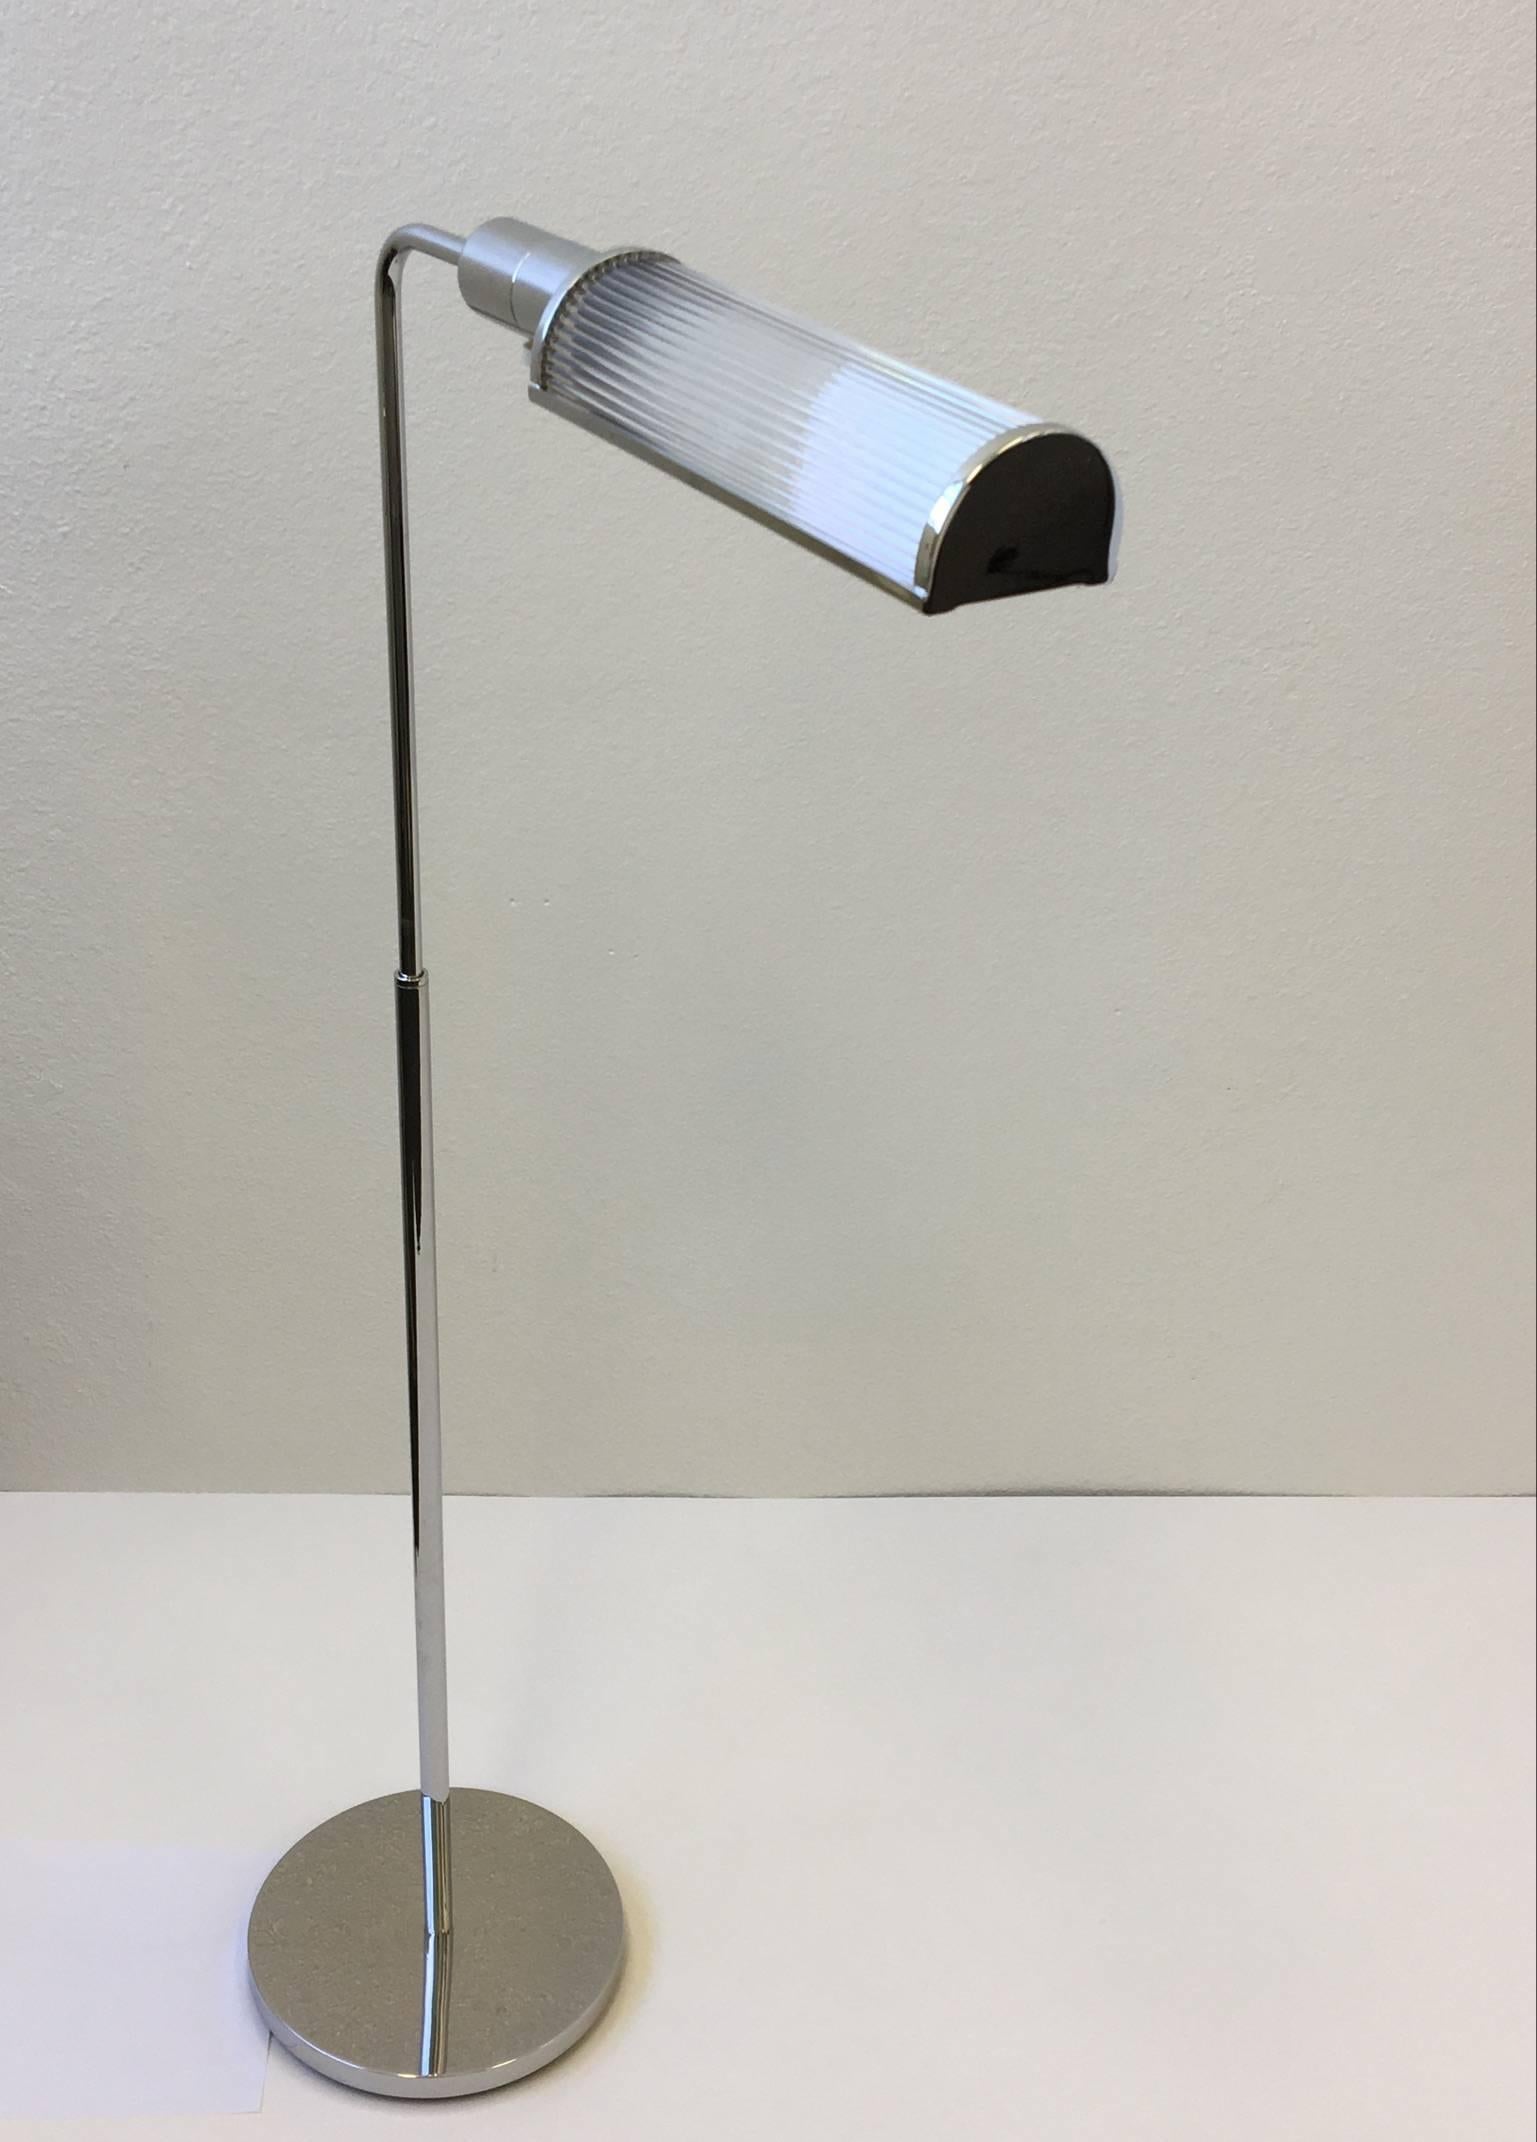 A pair of glamorous chrome and glass adjustable floor lamps designed by Casella in the 1970s. 
The lamps have been professionally restored.
The socket is a full range control dimmer.
You can rotate the lamp 360*.
The lamp is 48.5